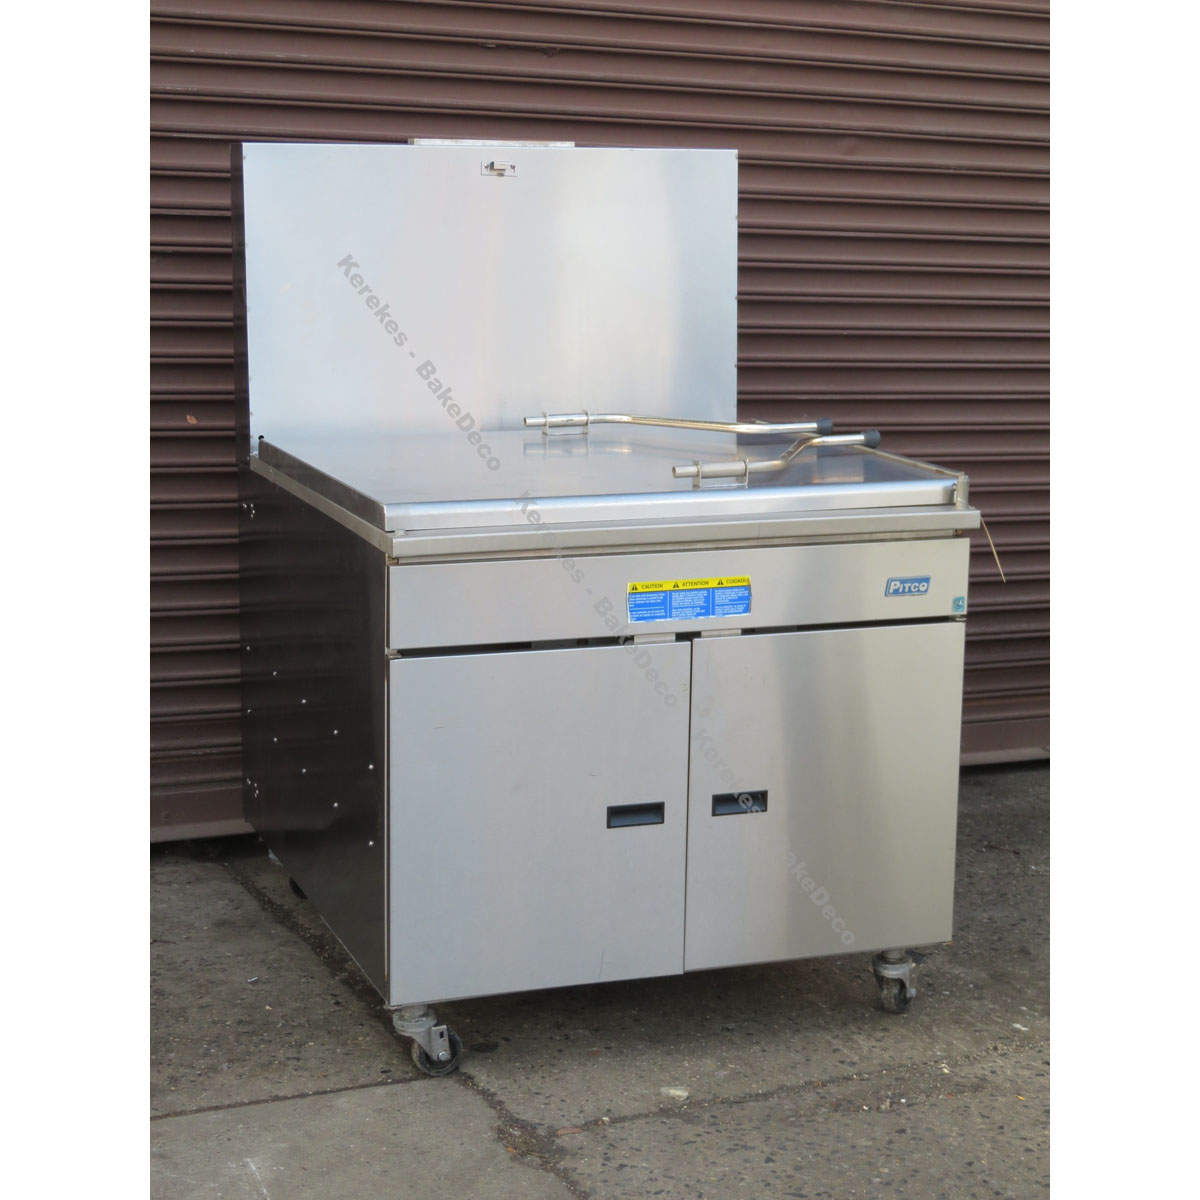 Pitco 34PSS Gas Donut Fryer with 210 Lb Oil Capacity, Used Great Condition image 4